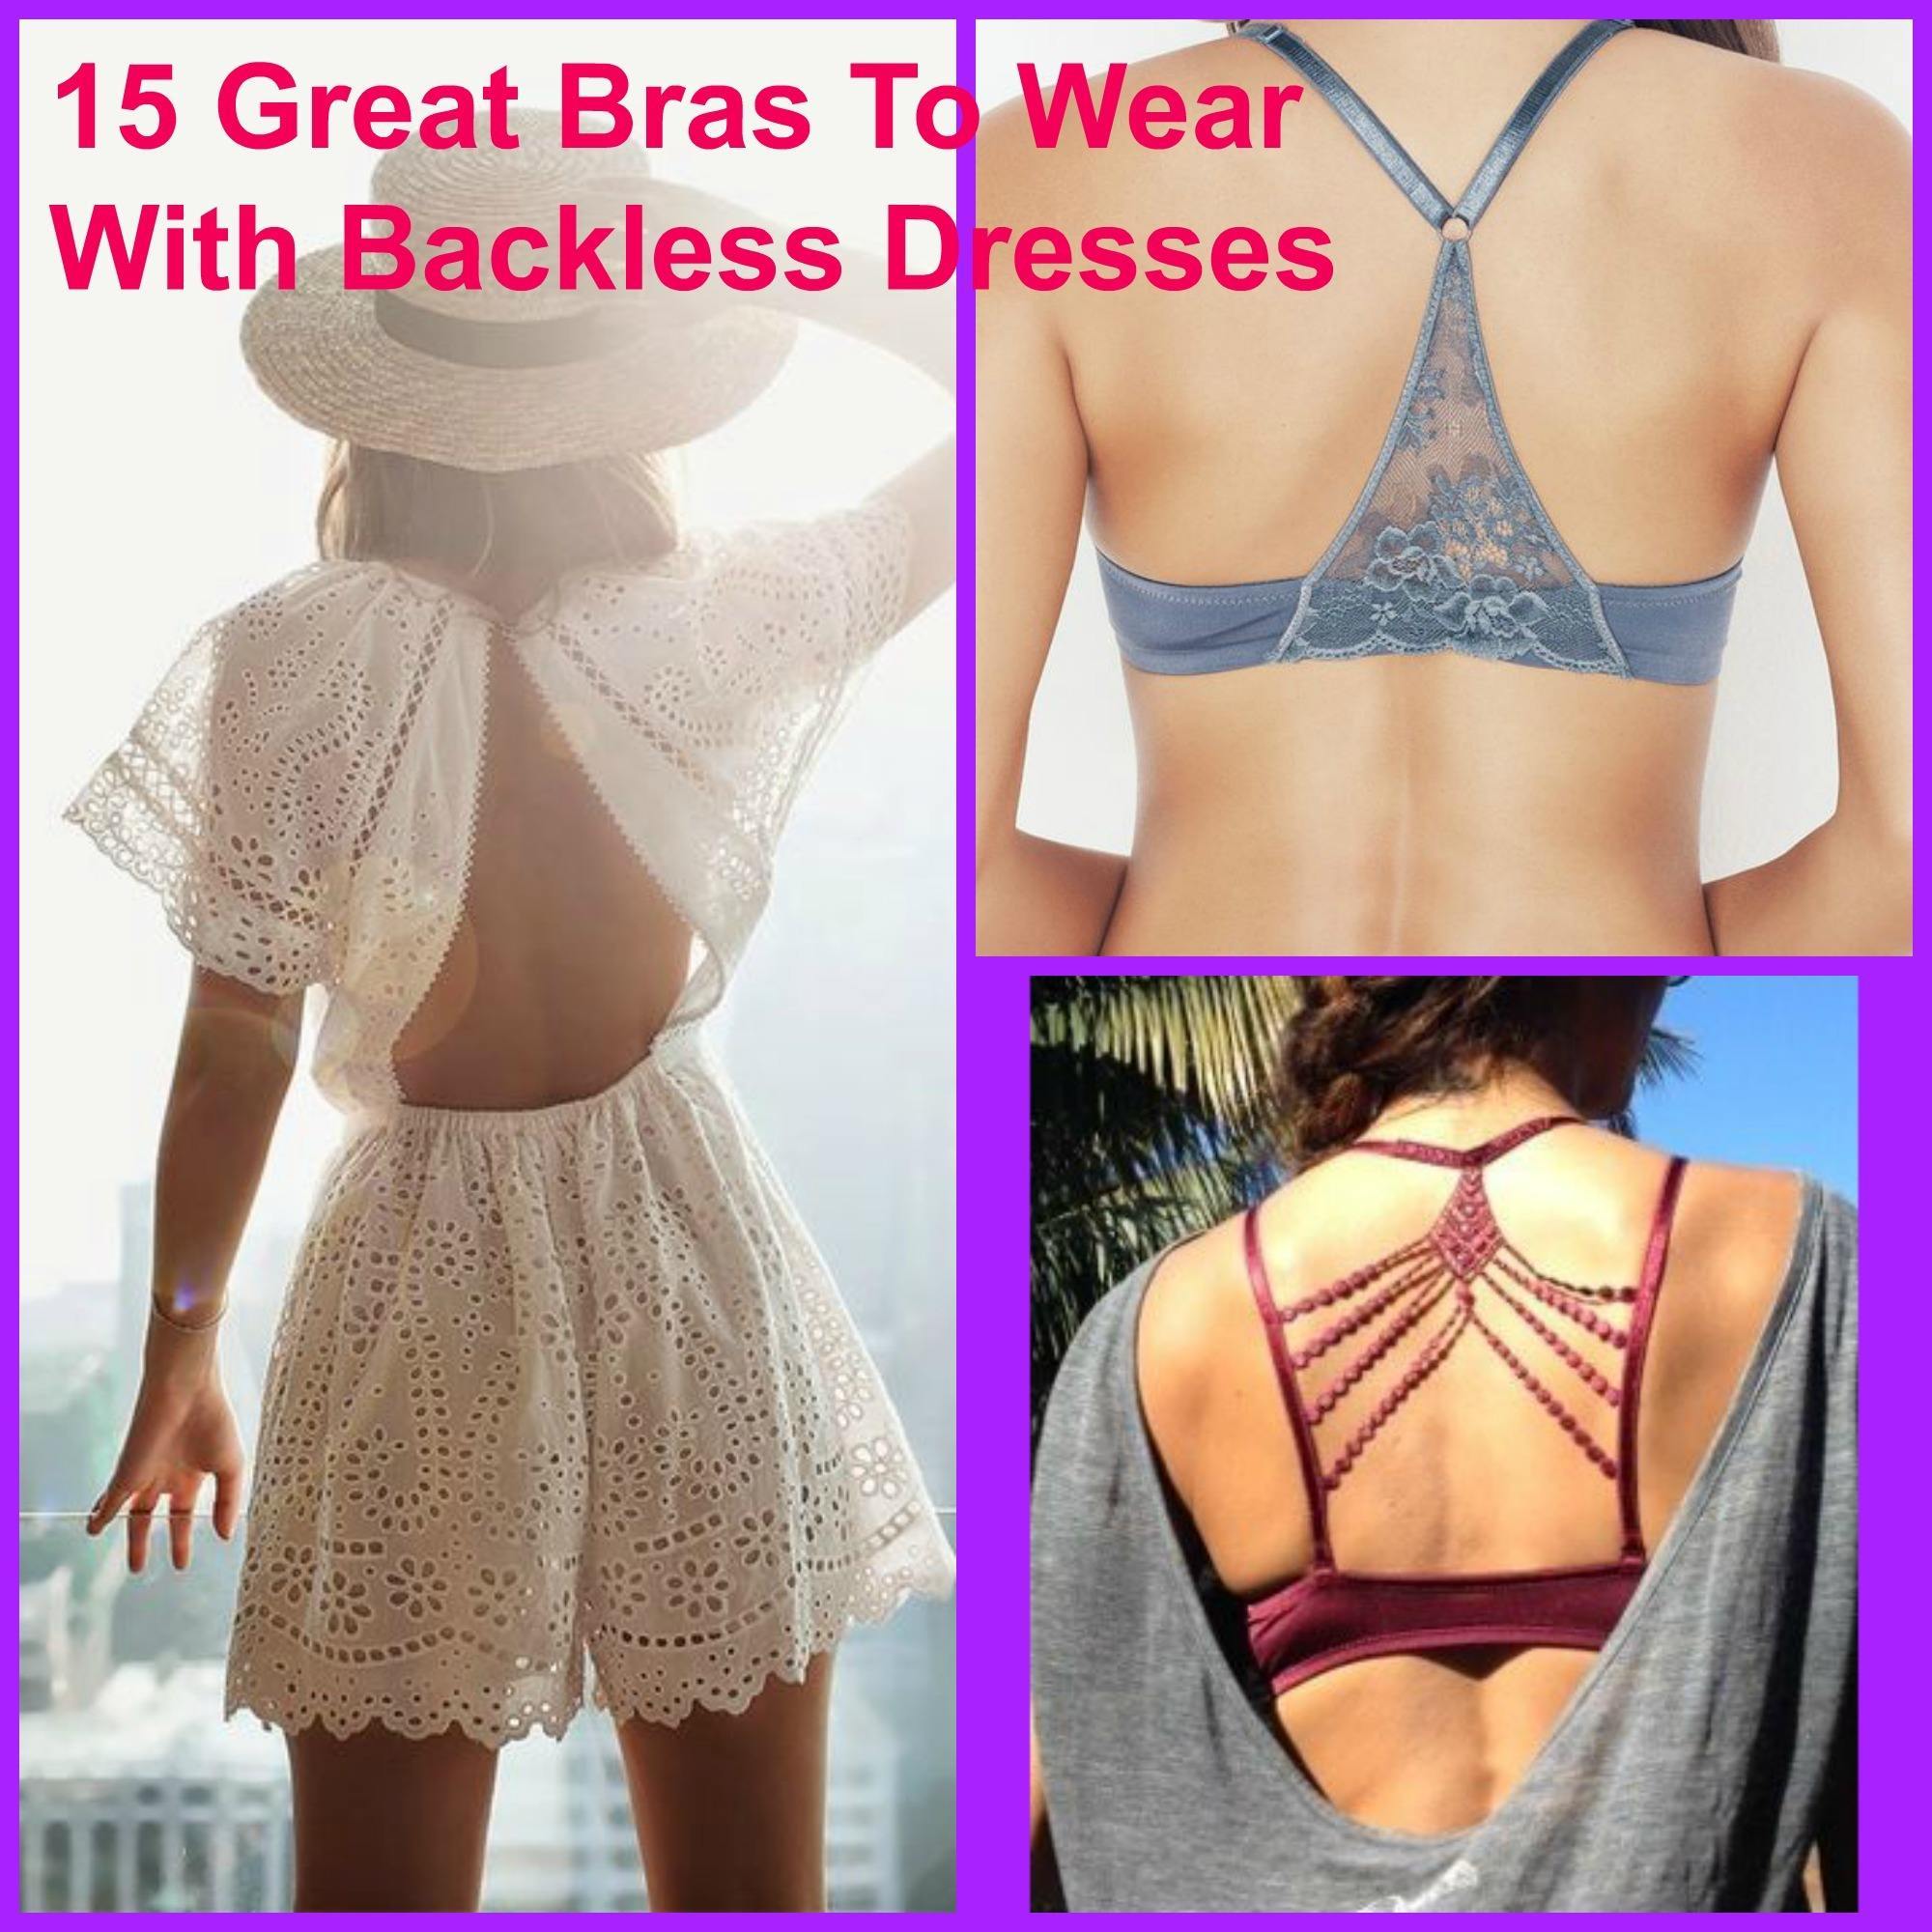 How to Wear a Bra Under a Backless Dress - How to Tie Your Backless Dress  Over Your Bra - Straight A Style